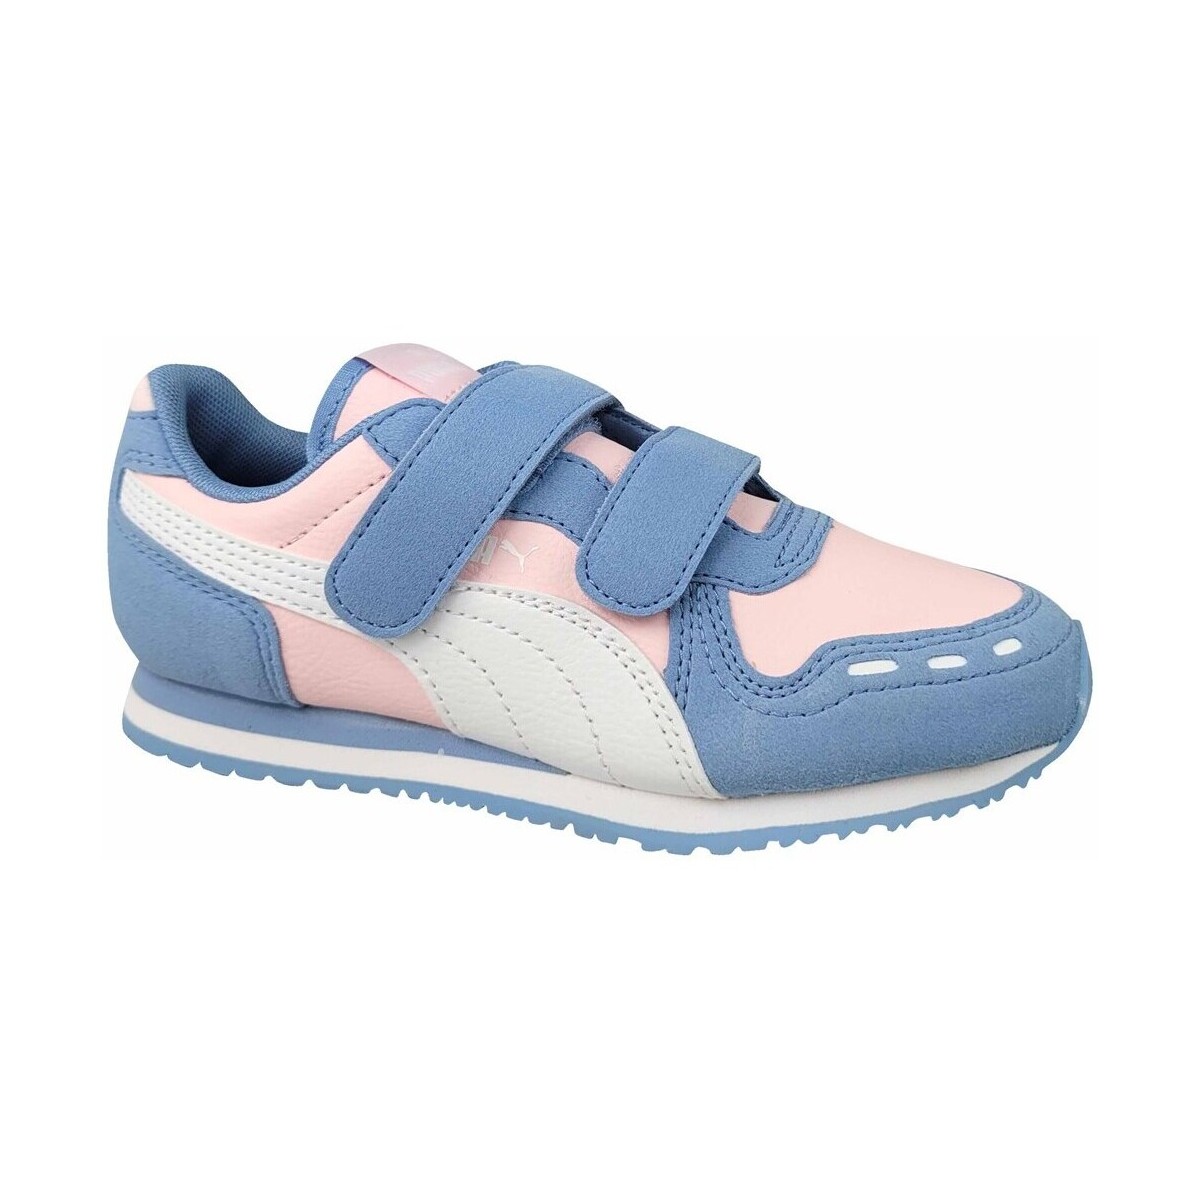 Shoes Children Low top trainers Puma Cabana Racer Sl 20 V Ps Blue, Pink